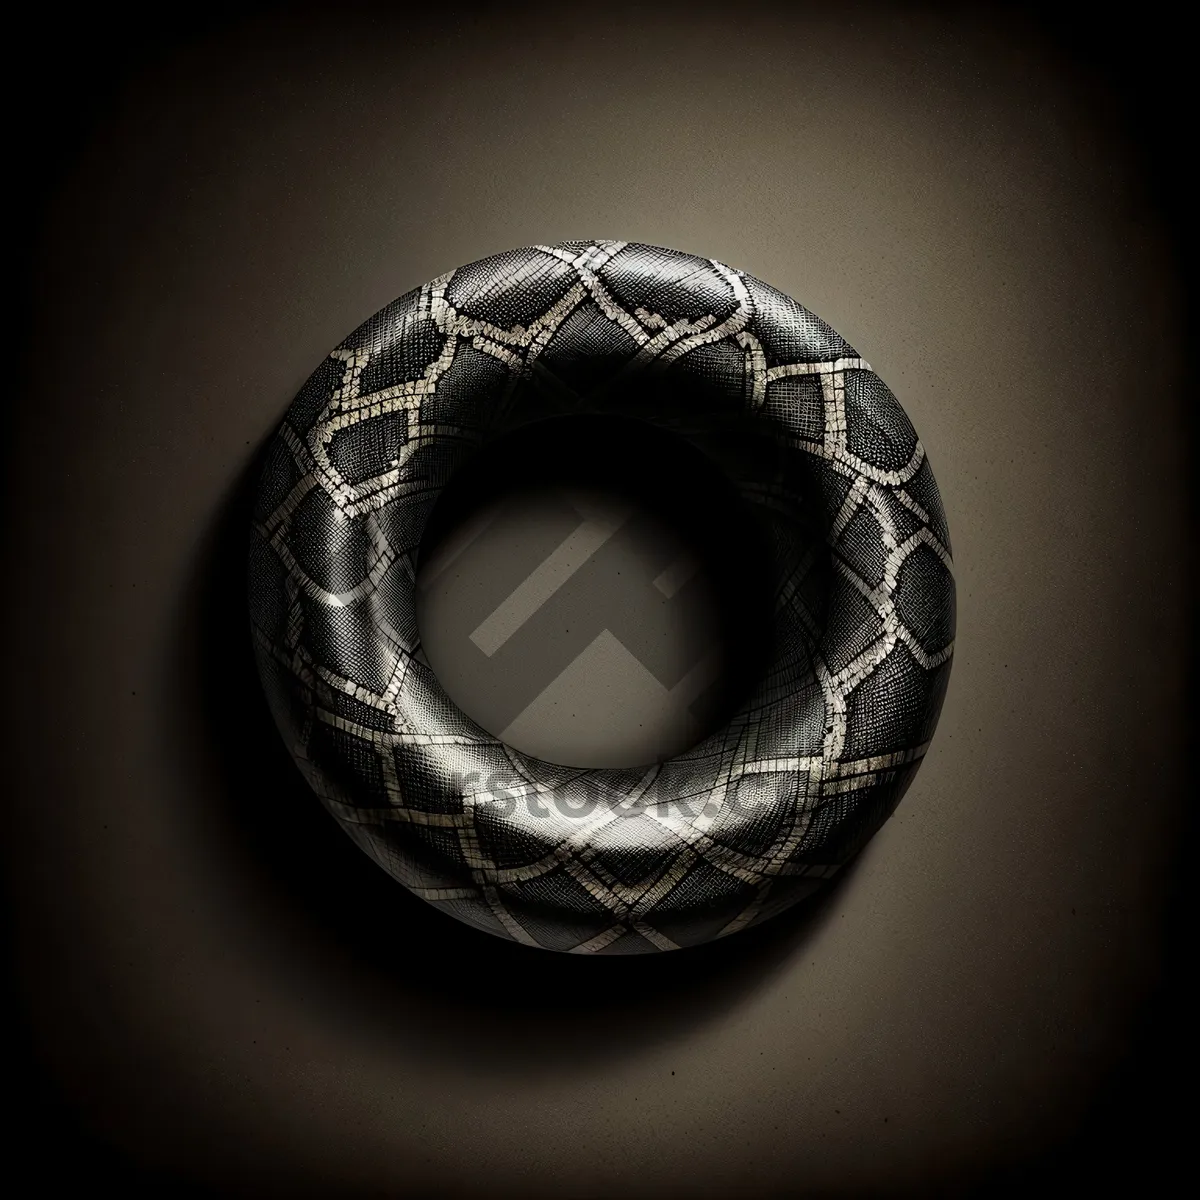 Picture of Shiny Black Bangled Jewel with 3D Spiral Symbol